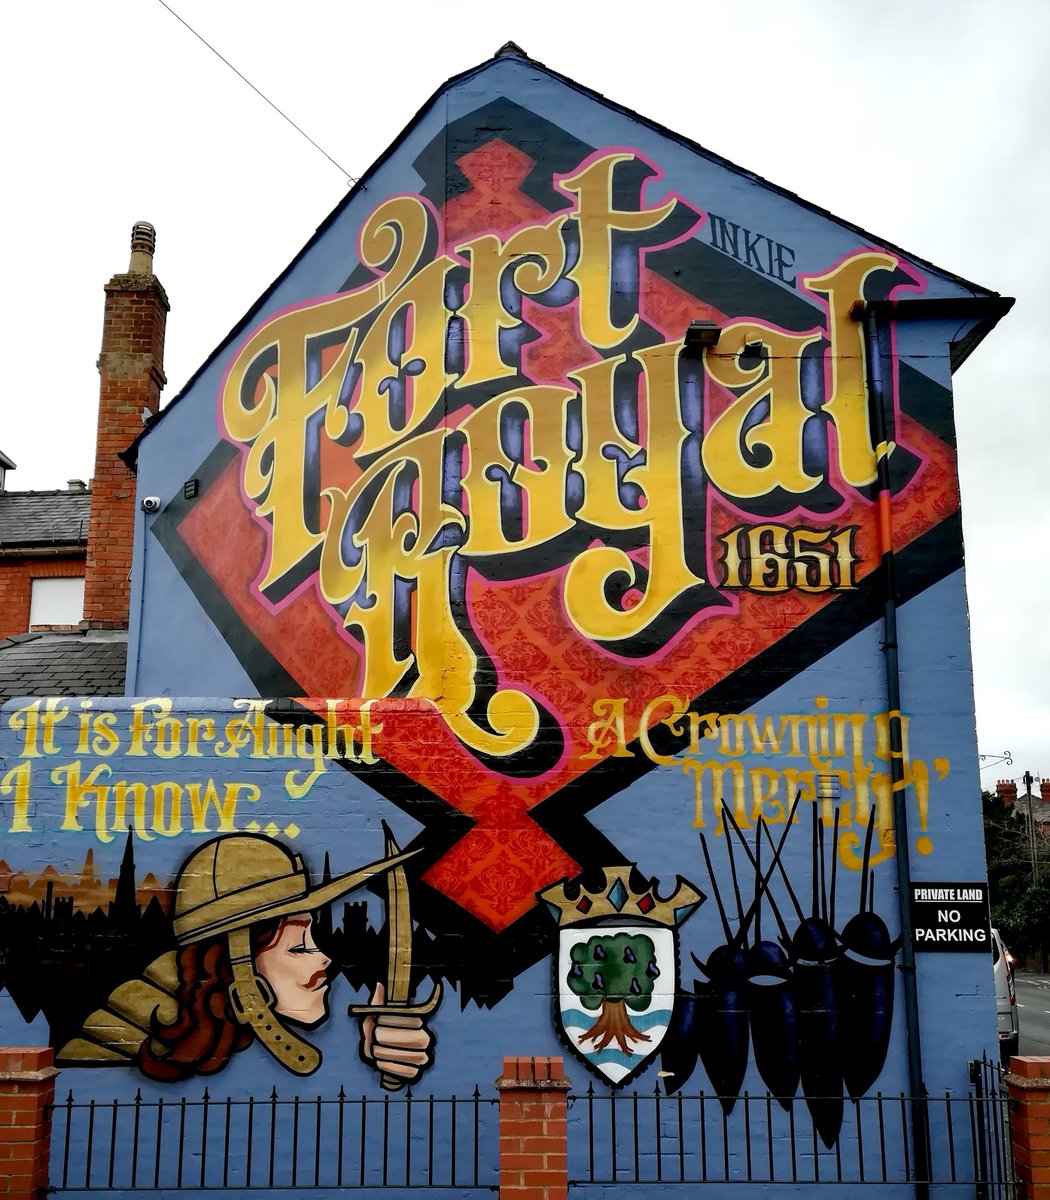 Mural on the side of the Mount Pleasant Inn, #Worcester, commemorating Fort Royal and the 1651 battle.

#EnglishCivilWar #BritishCivilWars #History  #mural #art